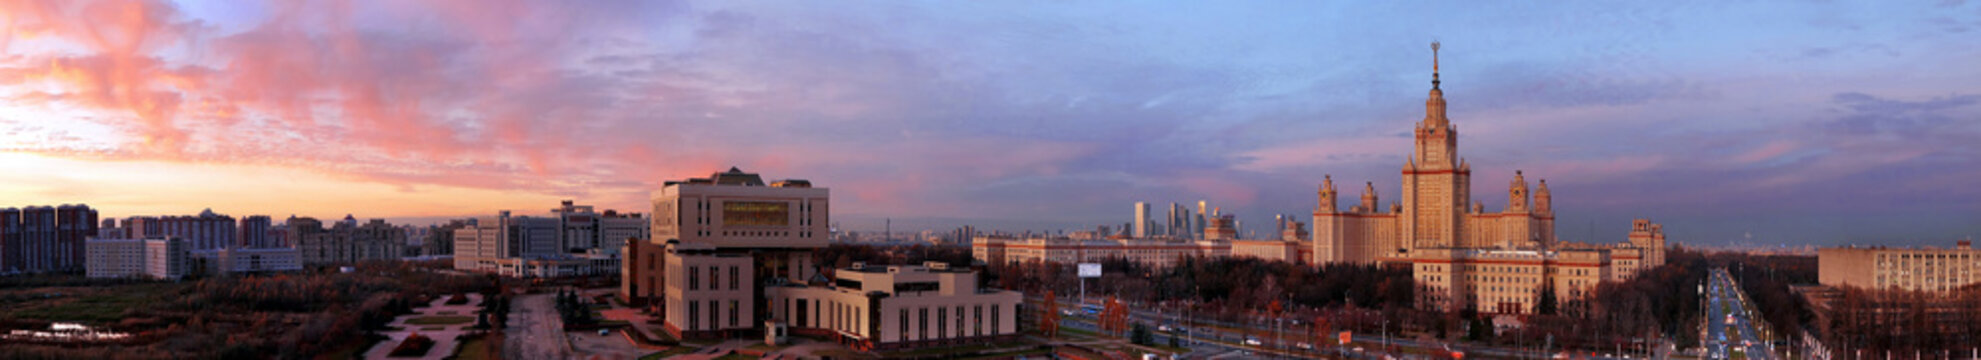 Wide angle aerial panorama of autumn campus of Moscow University under dramatic sunset cloudy sky